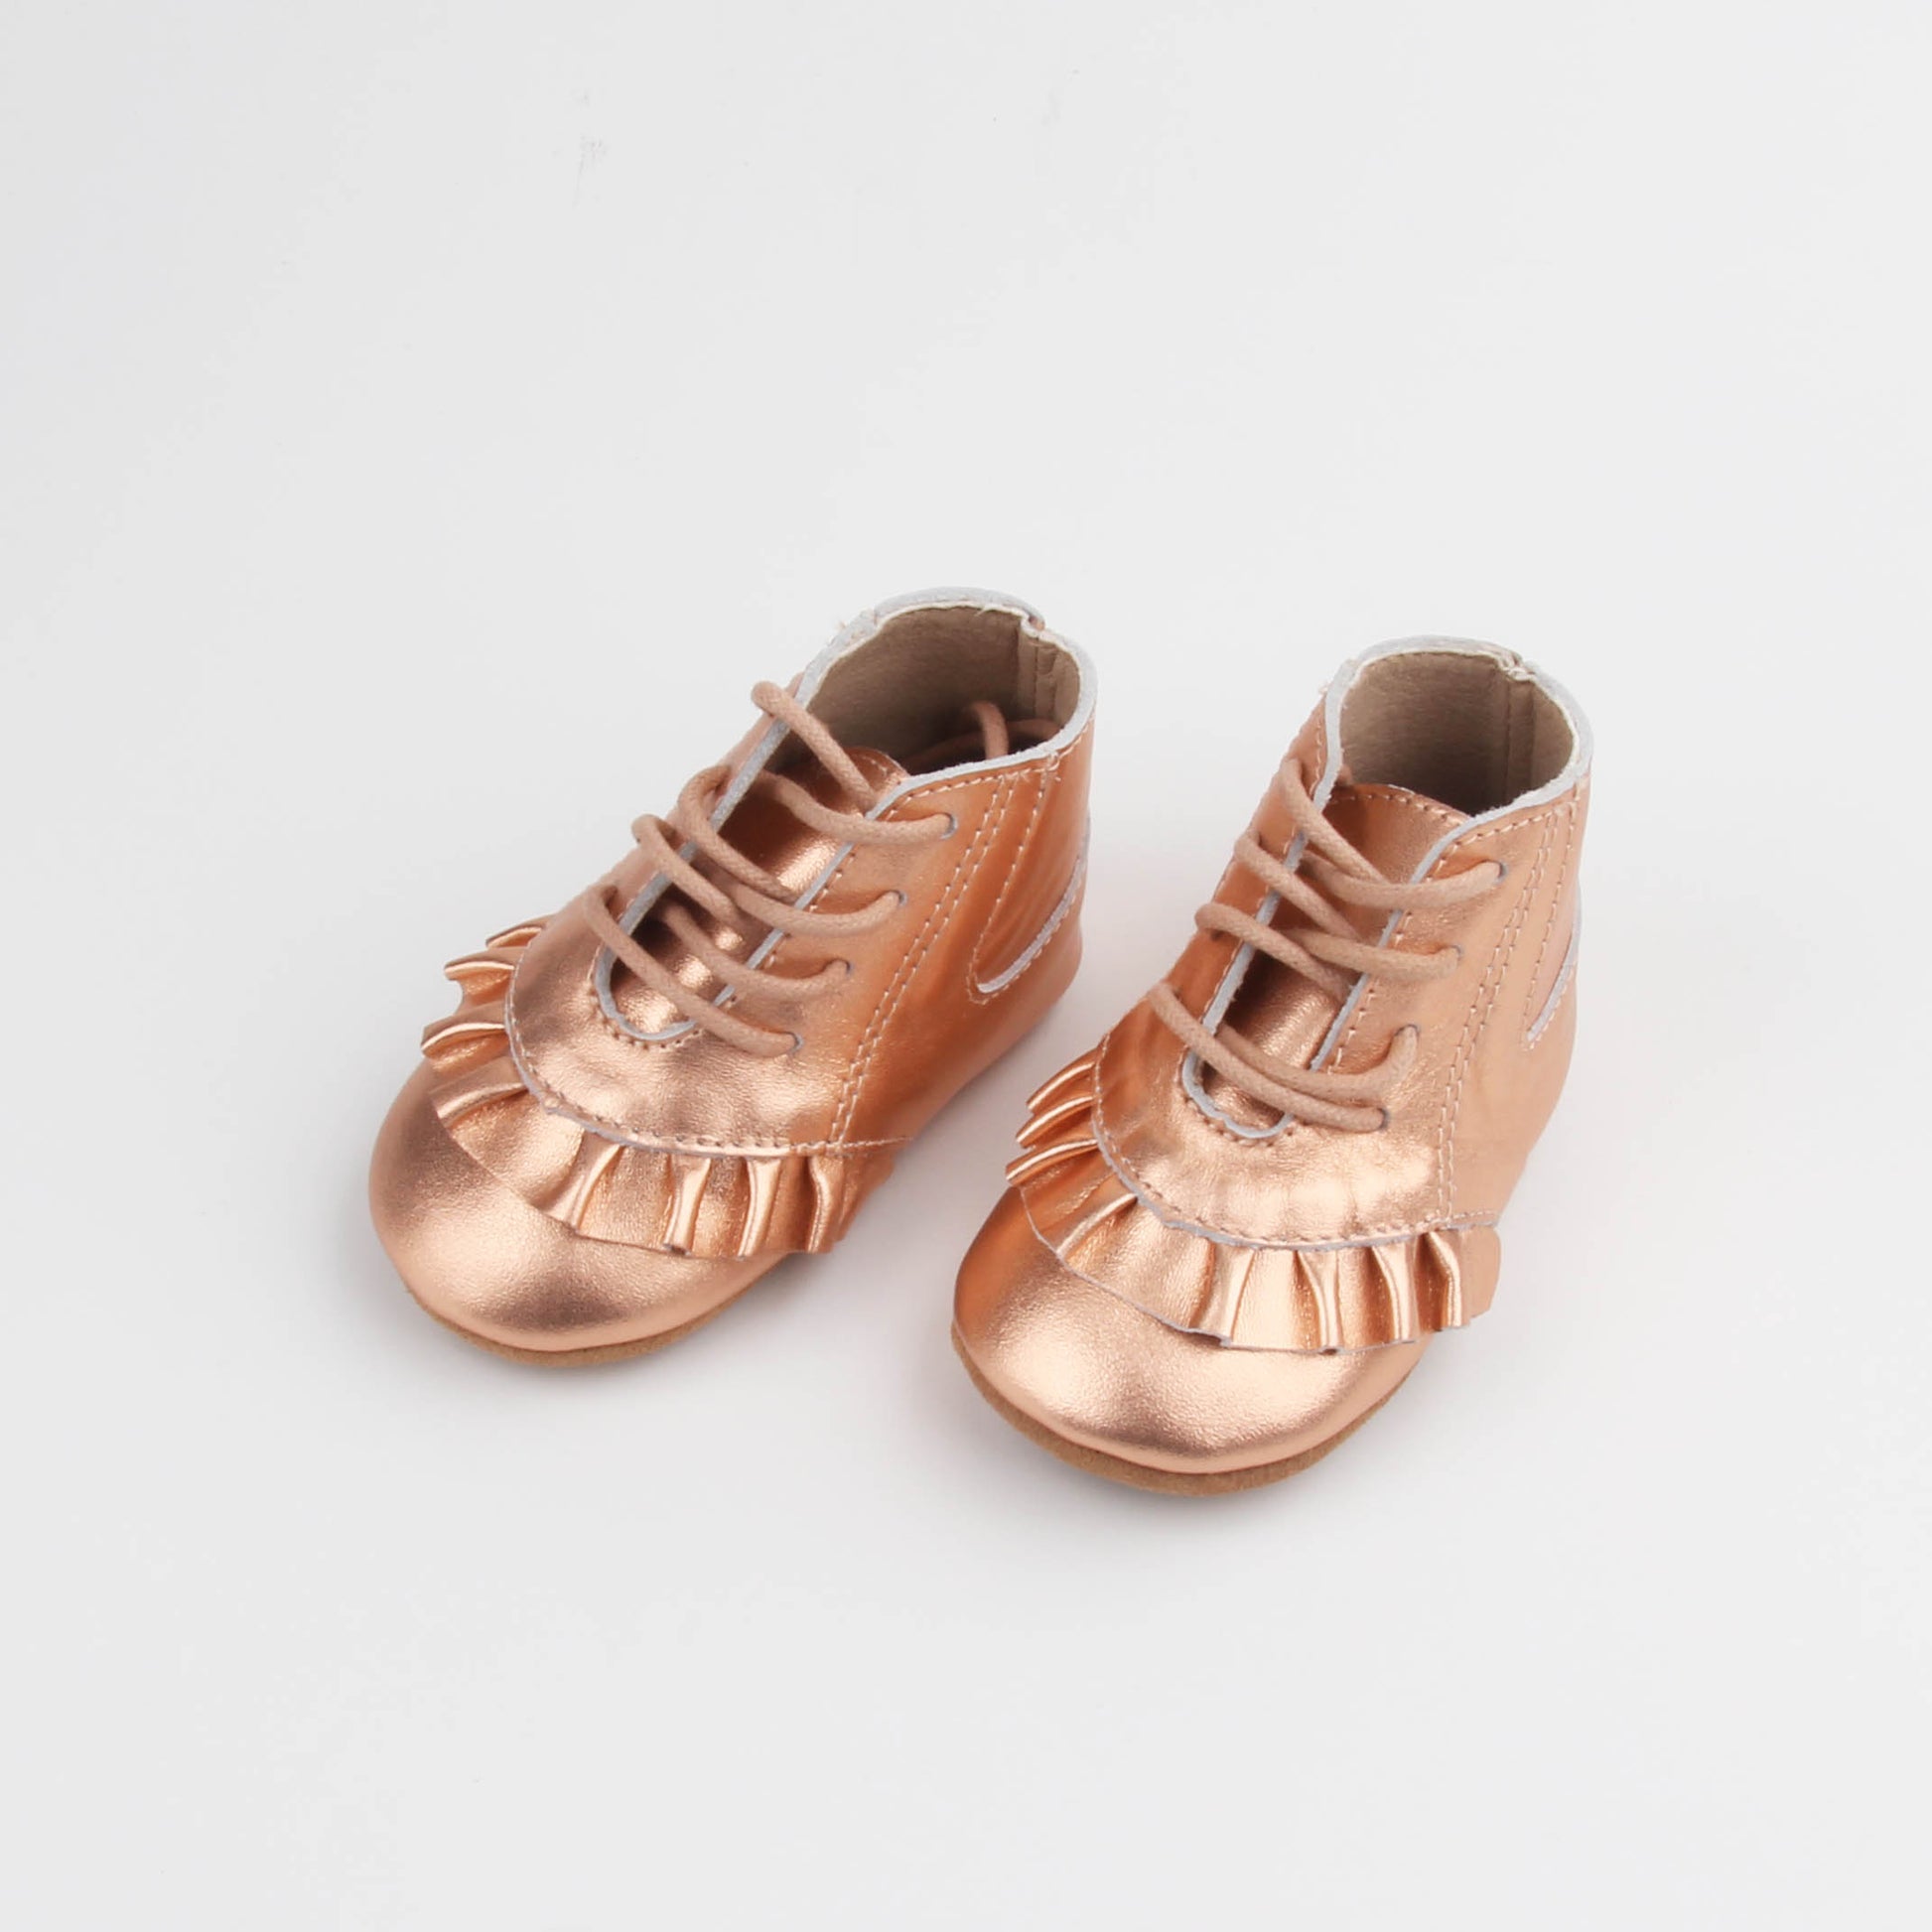 gold baby shoe size 5